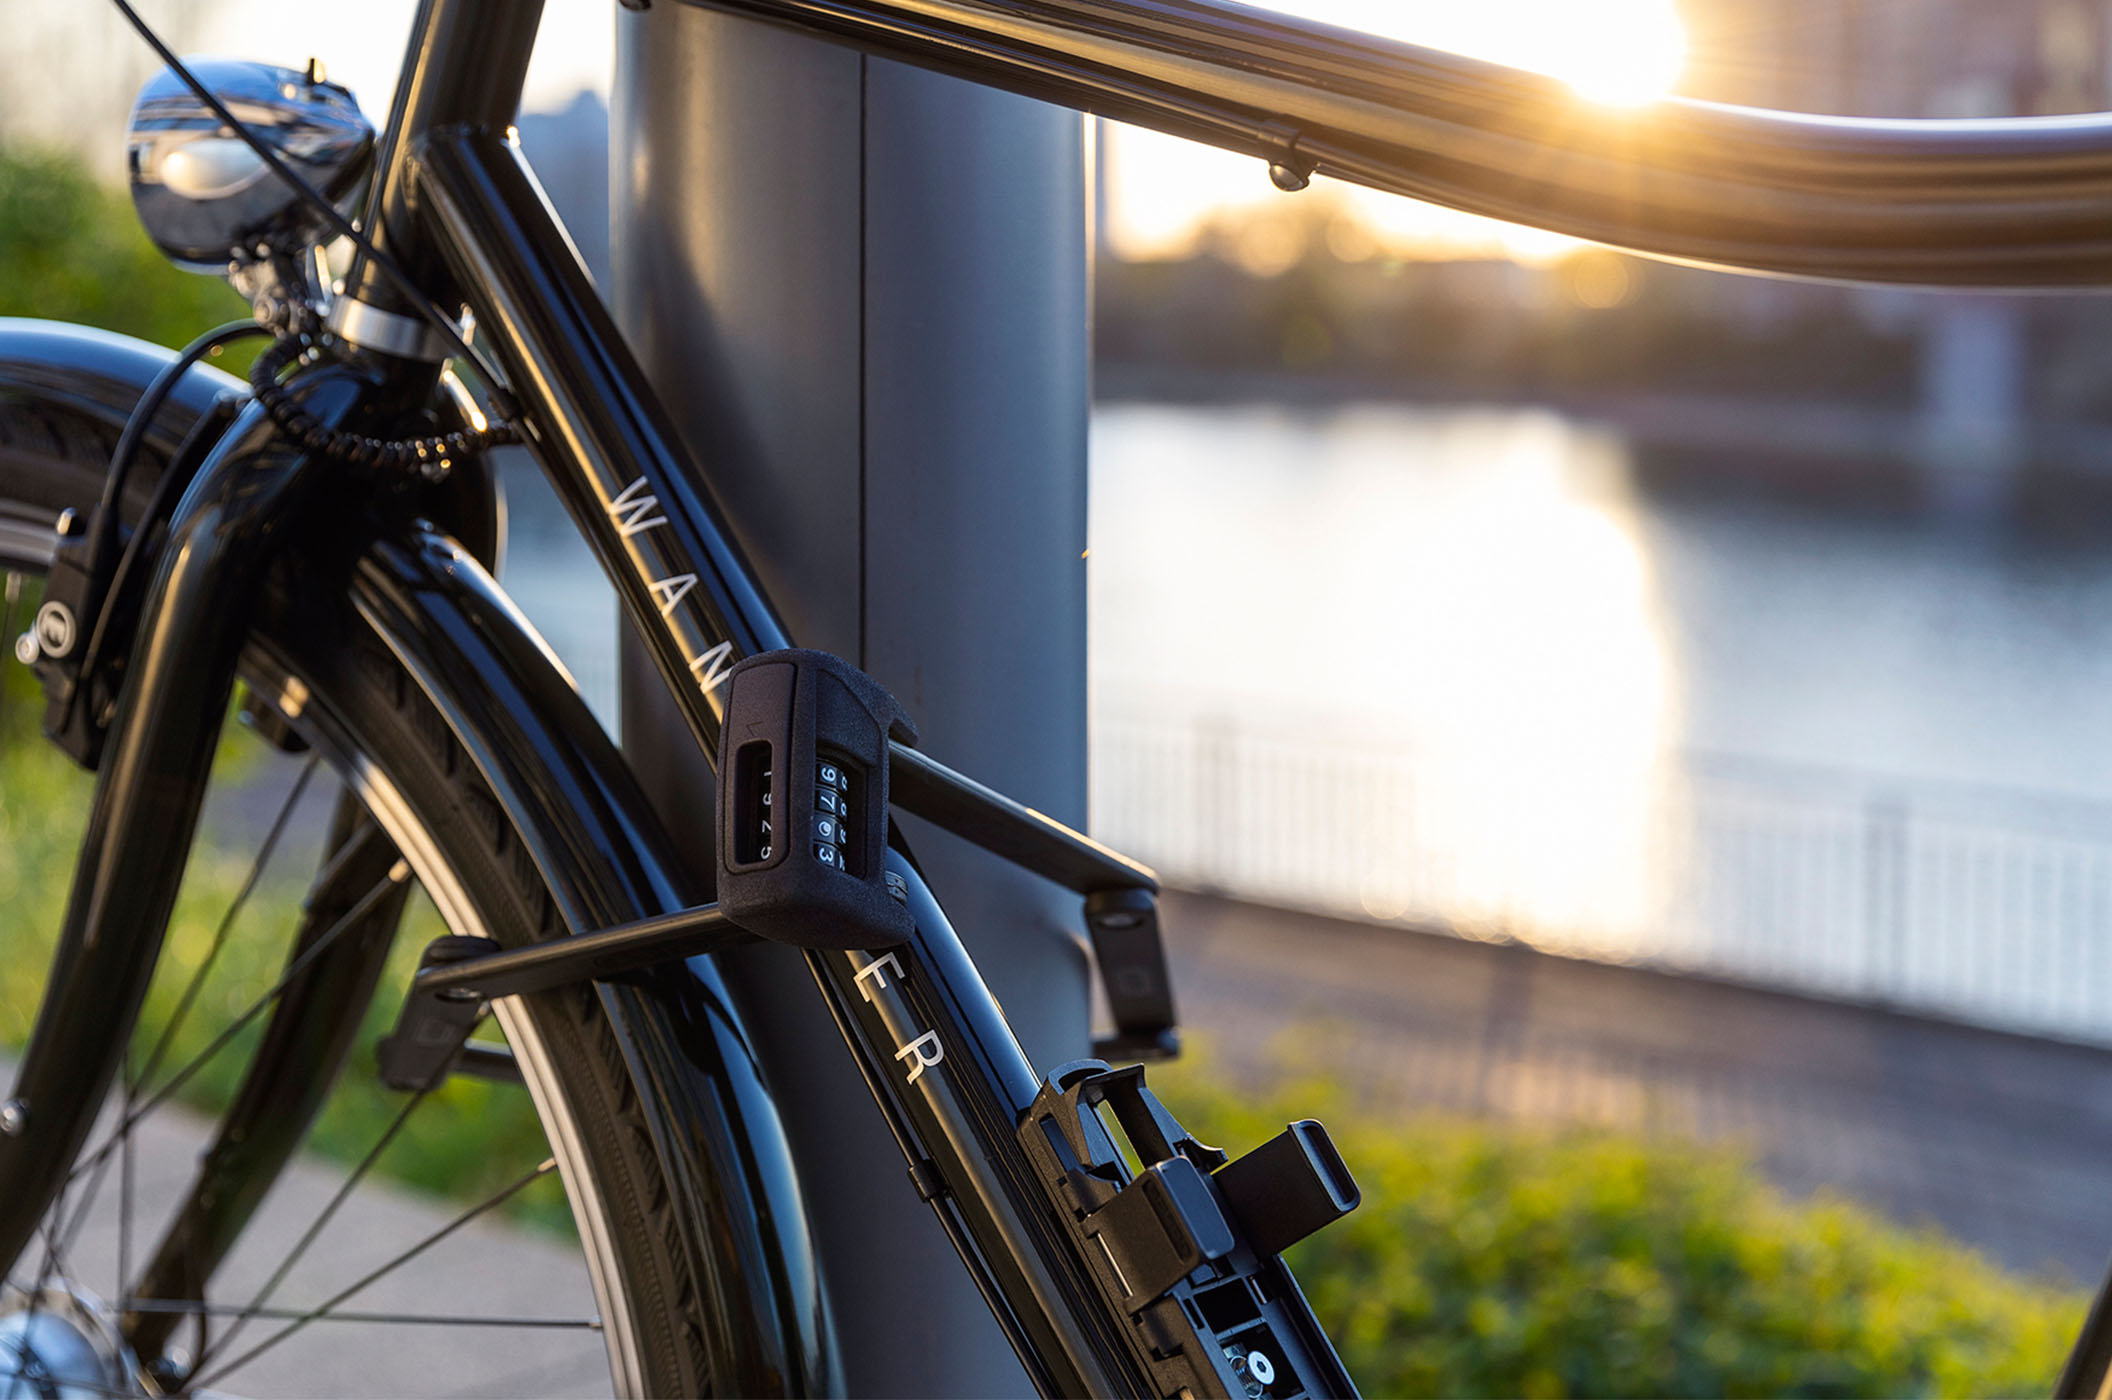 The proven U-lock design meets digital technology, resulting in a bike lock with smartphone control.